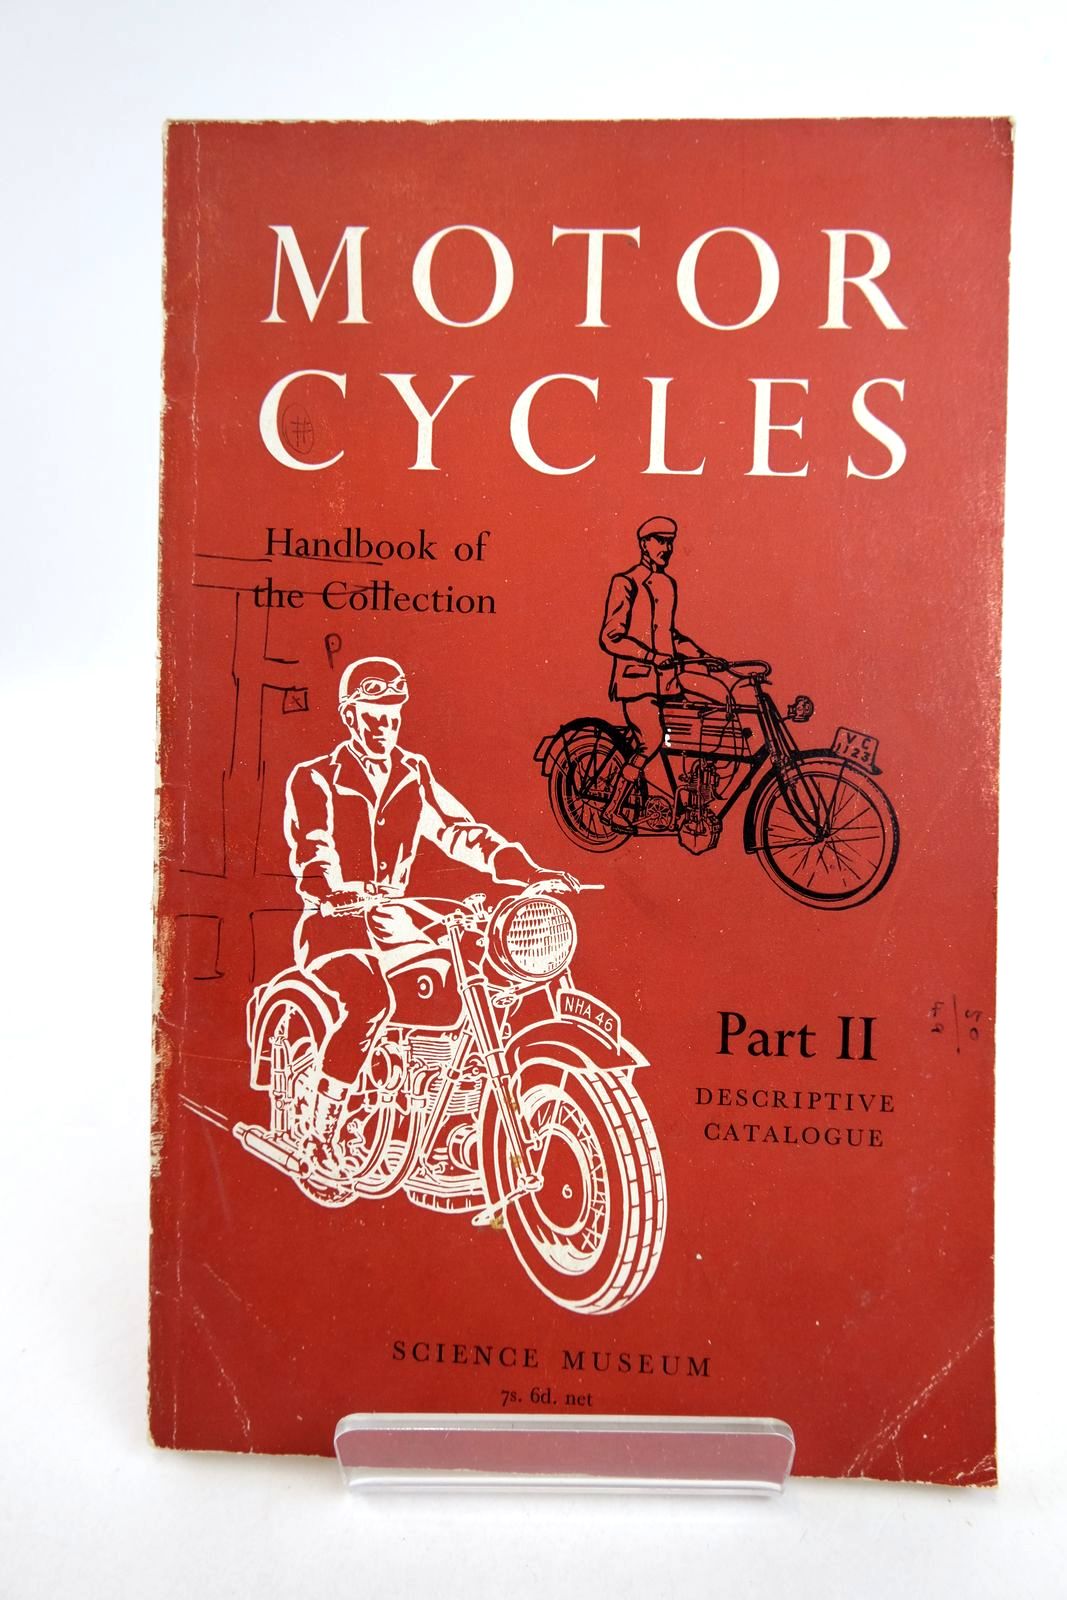 Photo of HANDBOOK OF THE COLLECTION ILLUSTRATING MOTORCYCLES PART II written by Caunter, C.F. published by HMSO (STOCK CODE: 2133175)  for sale by Stella & Rose's Books